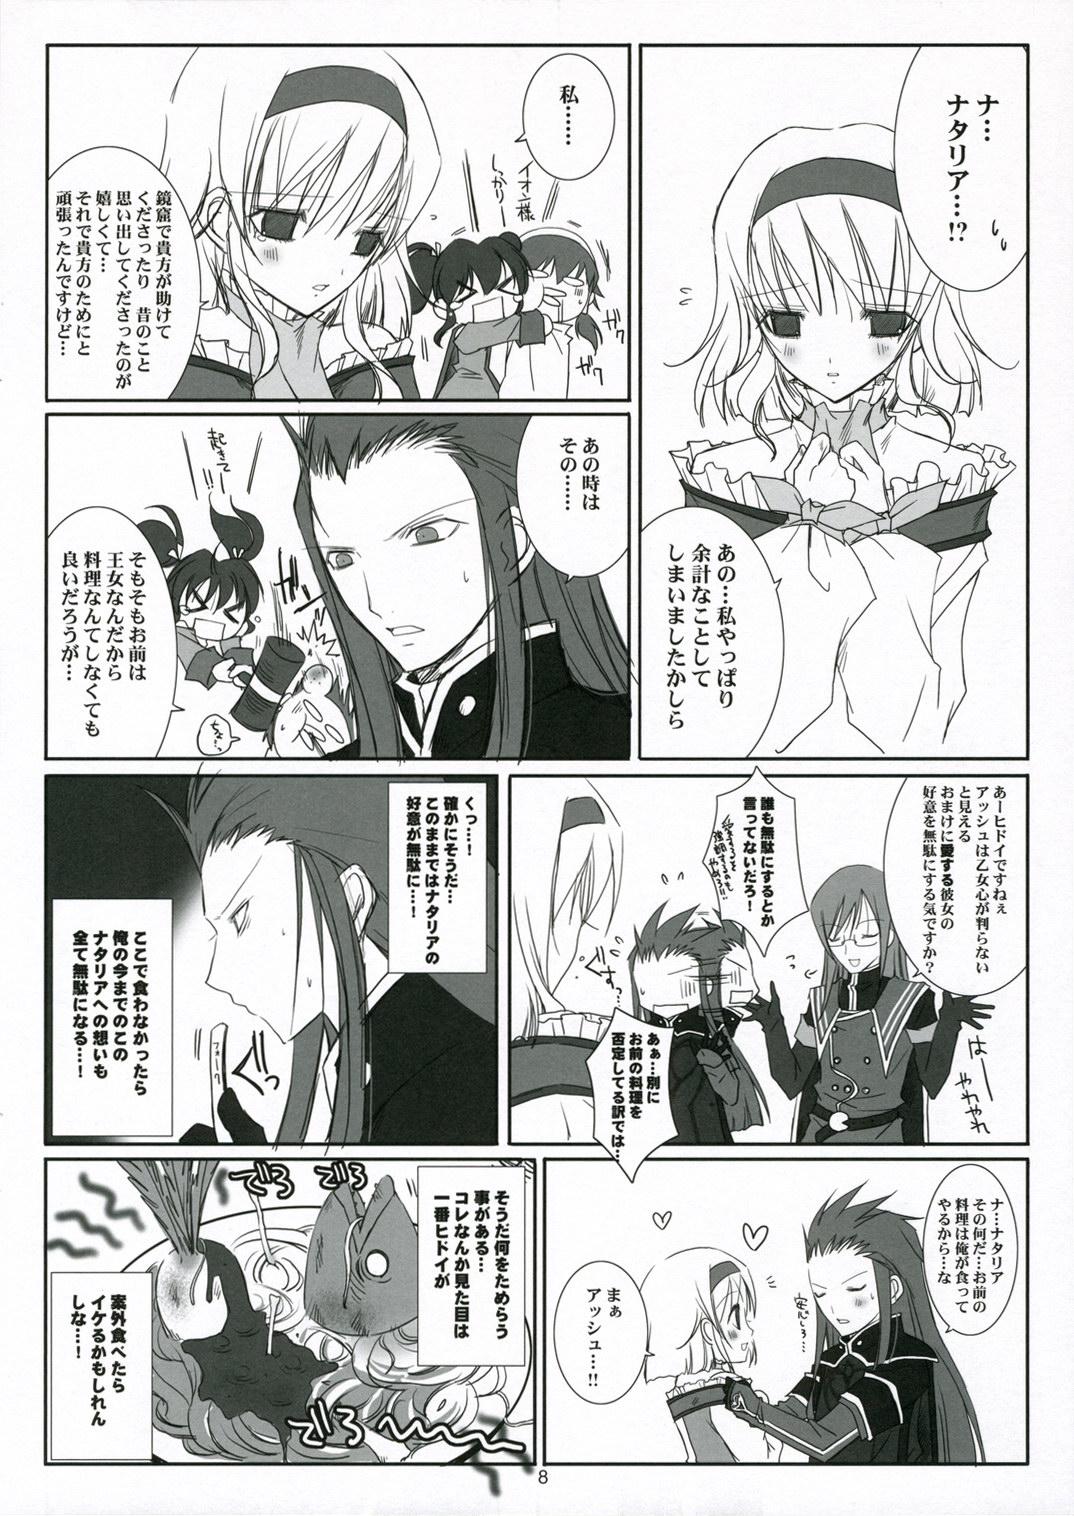 Sucking Cocks HONEYED - Tales of the abyss Pure18 - Page 8